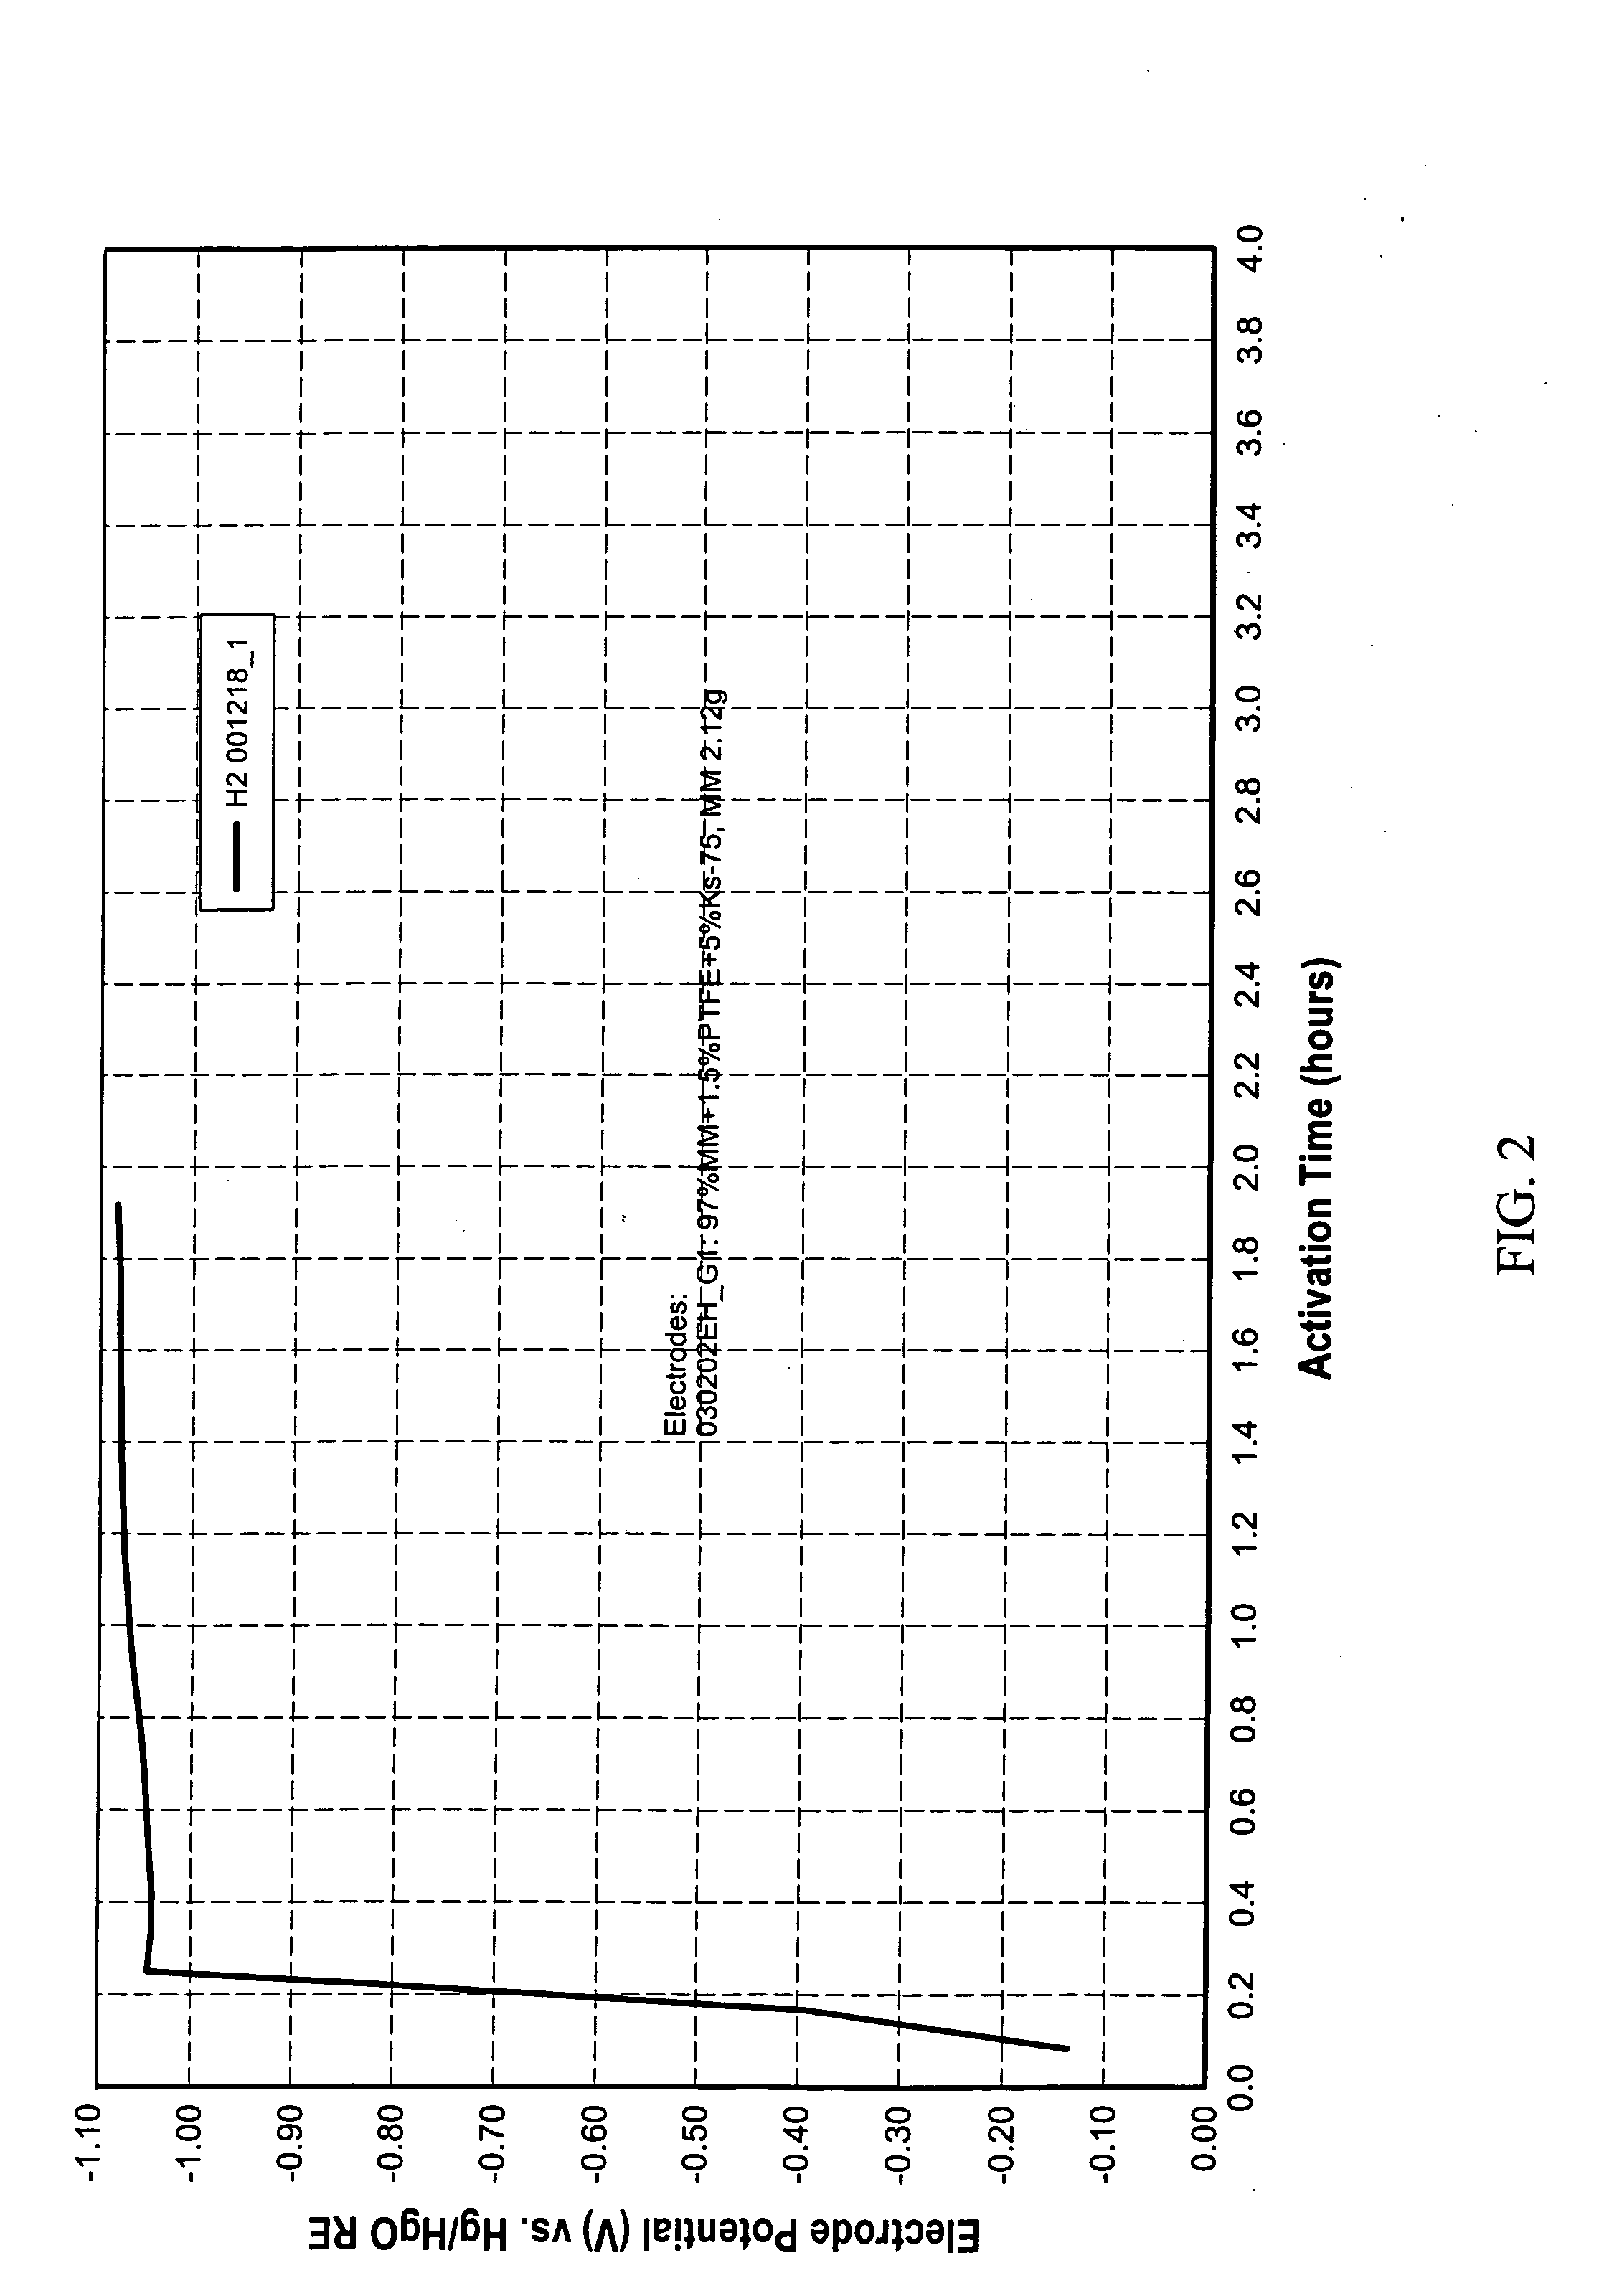 Rapid chemical charging of metal hydrides